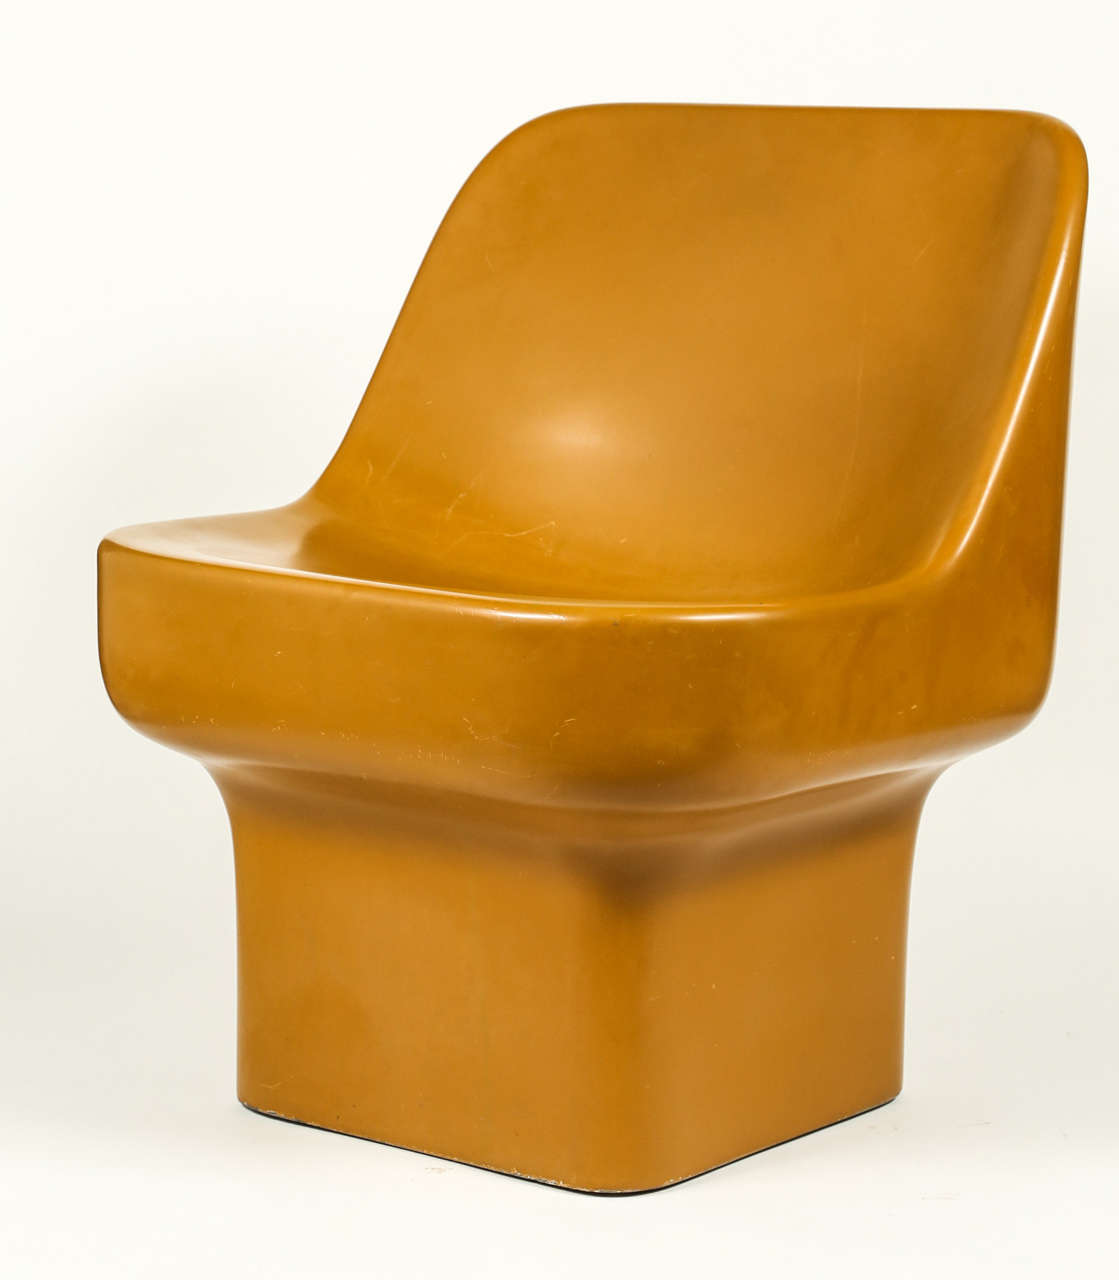 Lounge chairs by Douglas Deeds for Architectural Fiberglass in mustard glaze, circa 1975.